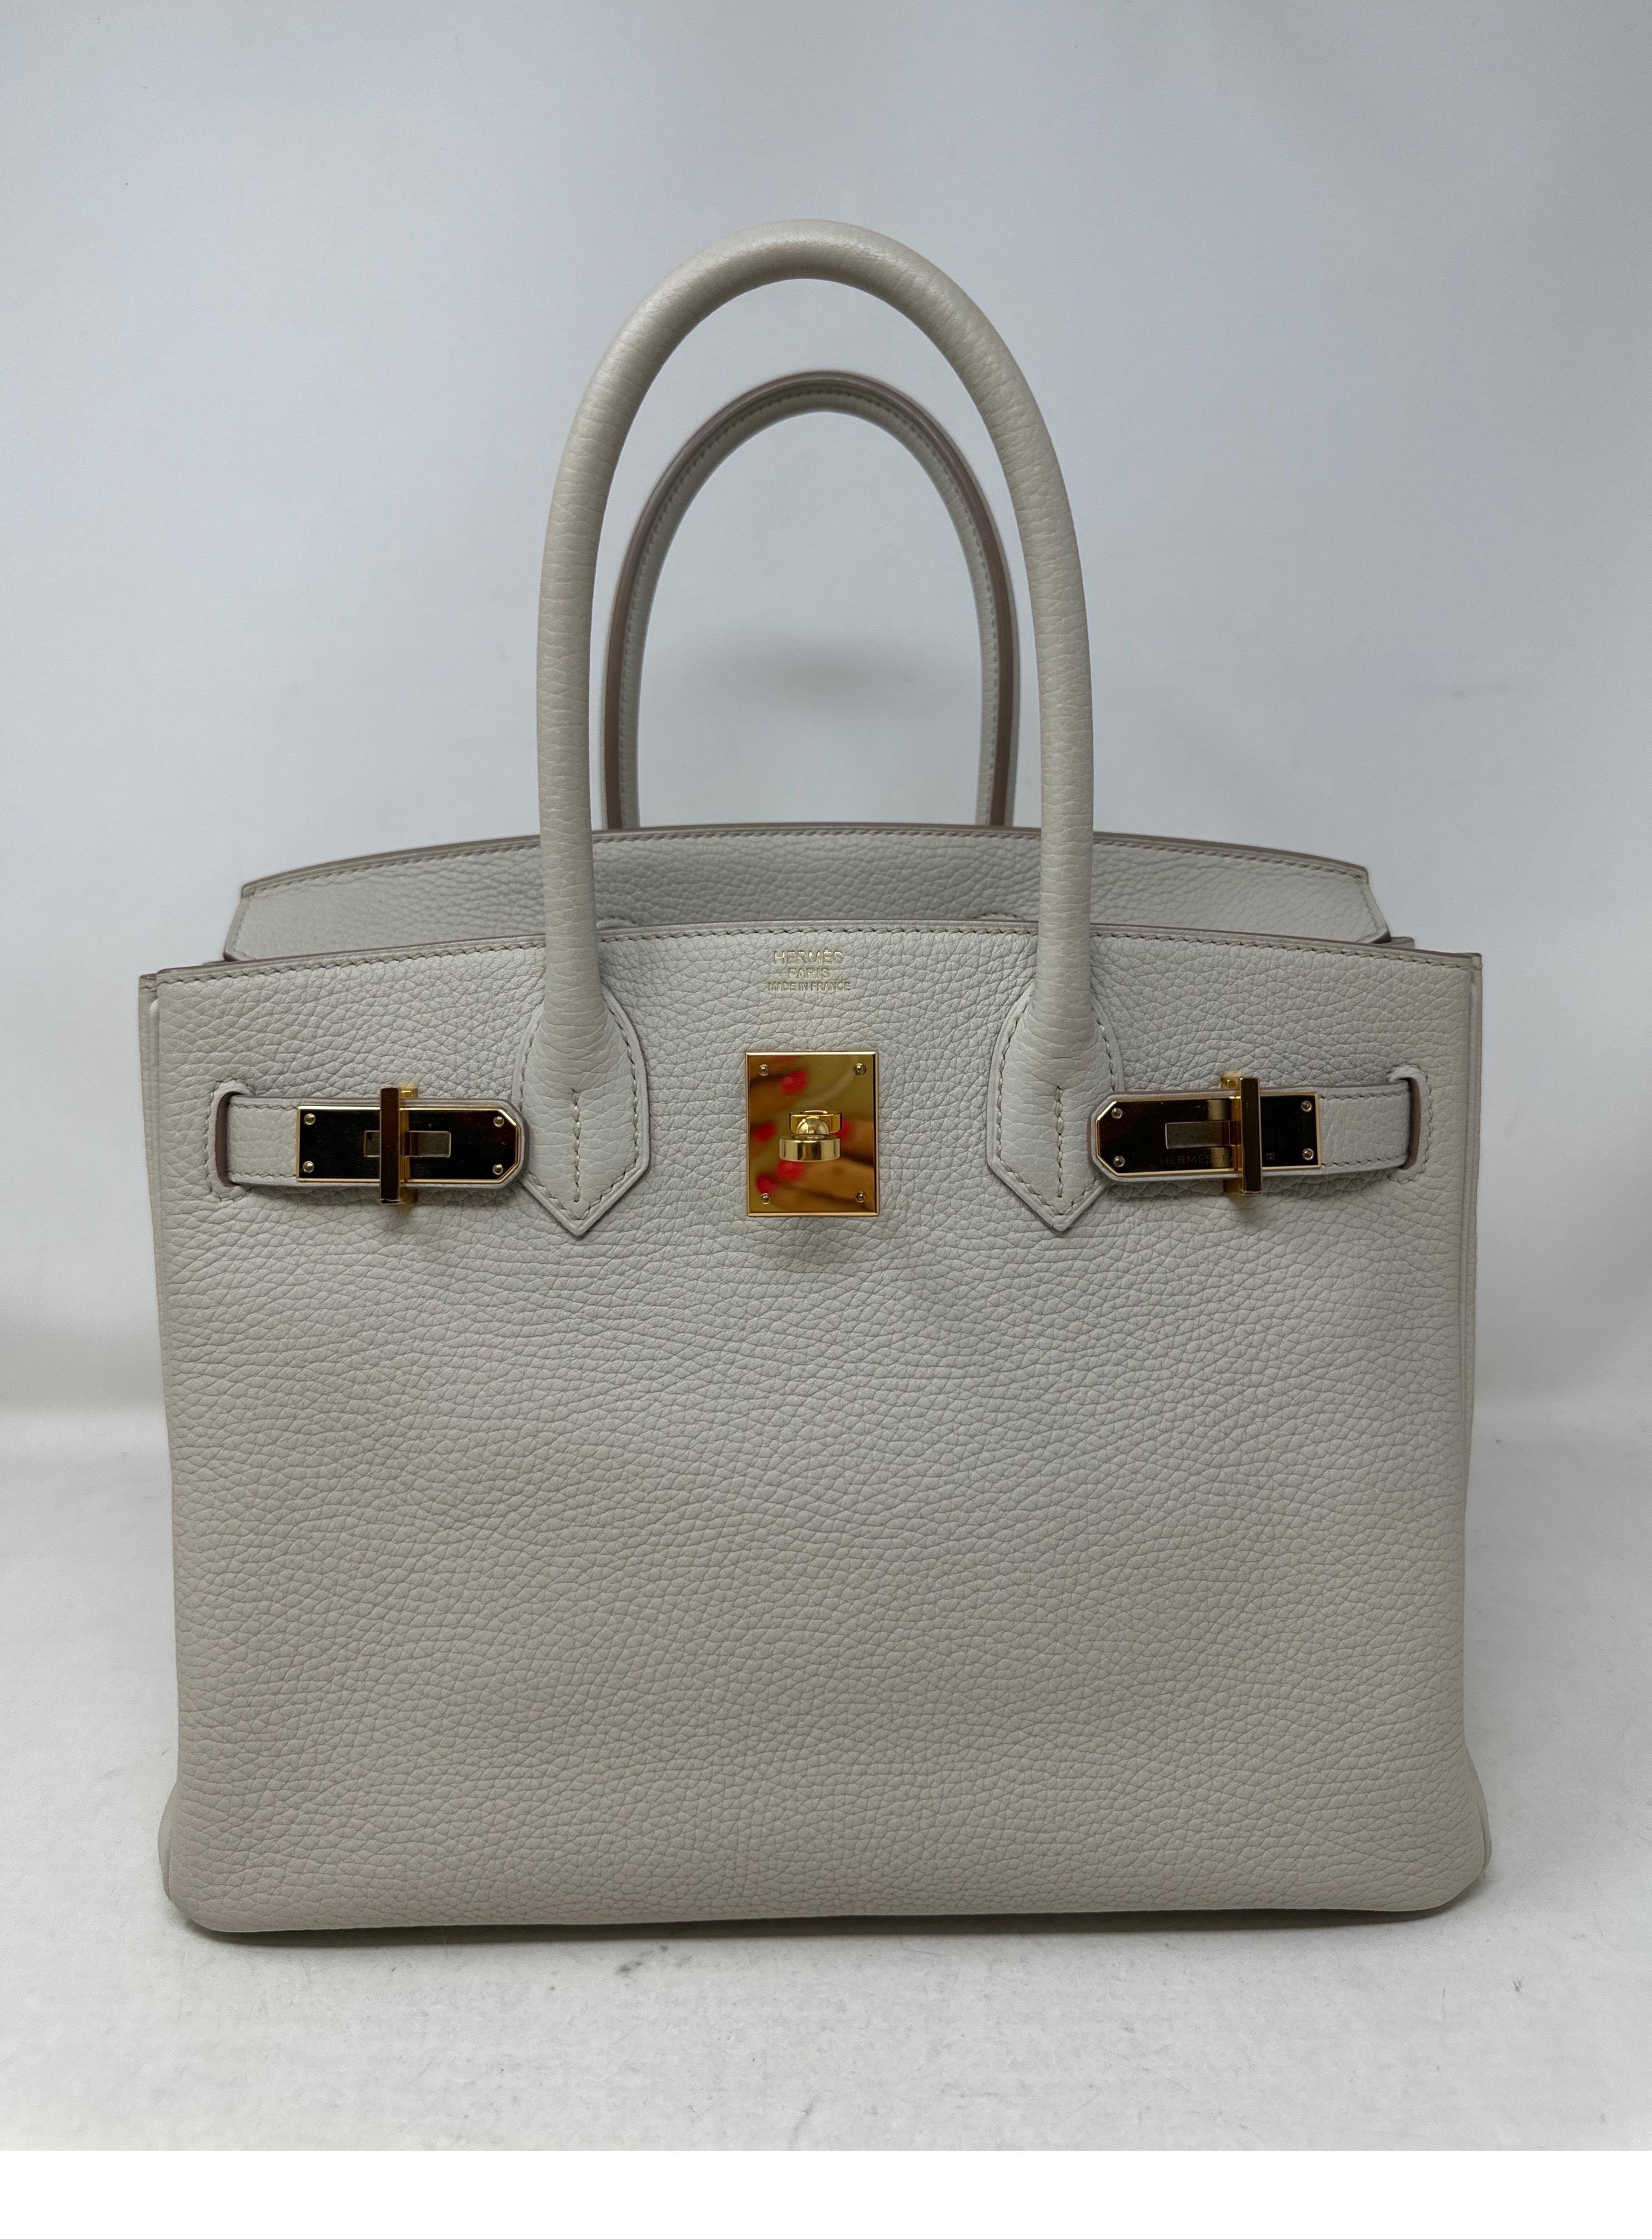 Hermes Craie Birkin 30 Bag. Rare most wanted off white color called Craie. Gold hardware. Excellent condition. Interior clean. Includes clochette, lock, keys, and dust bag. Great investment bag. Guaranteed authentic. 